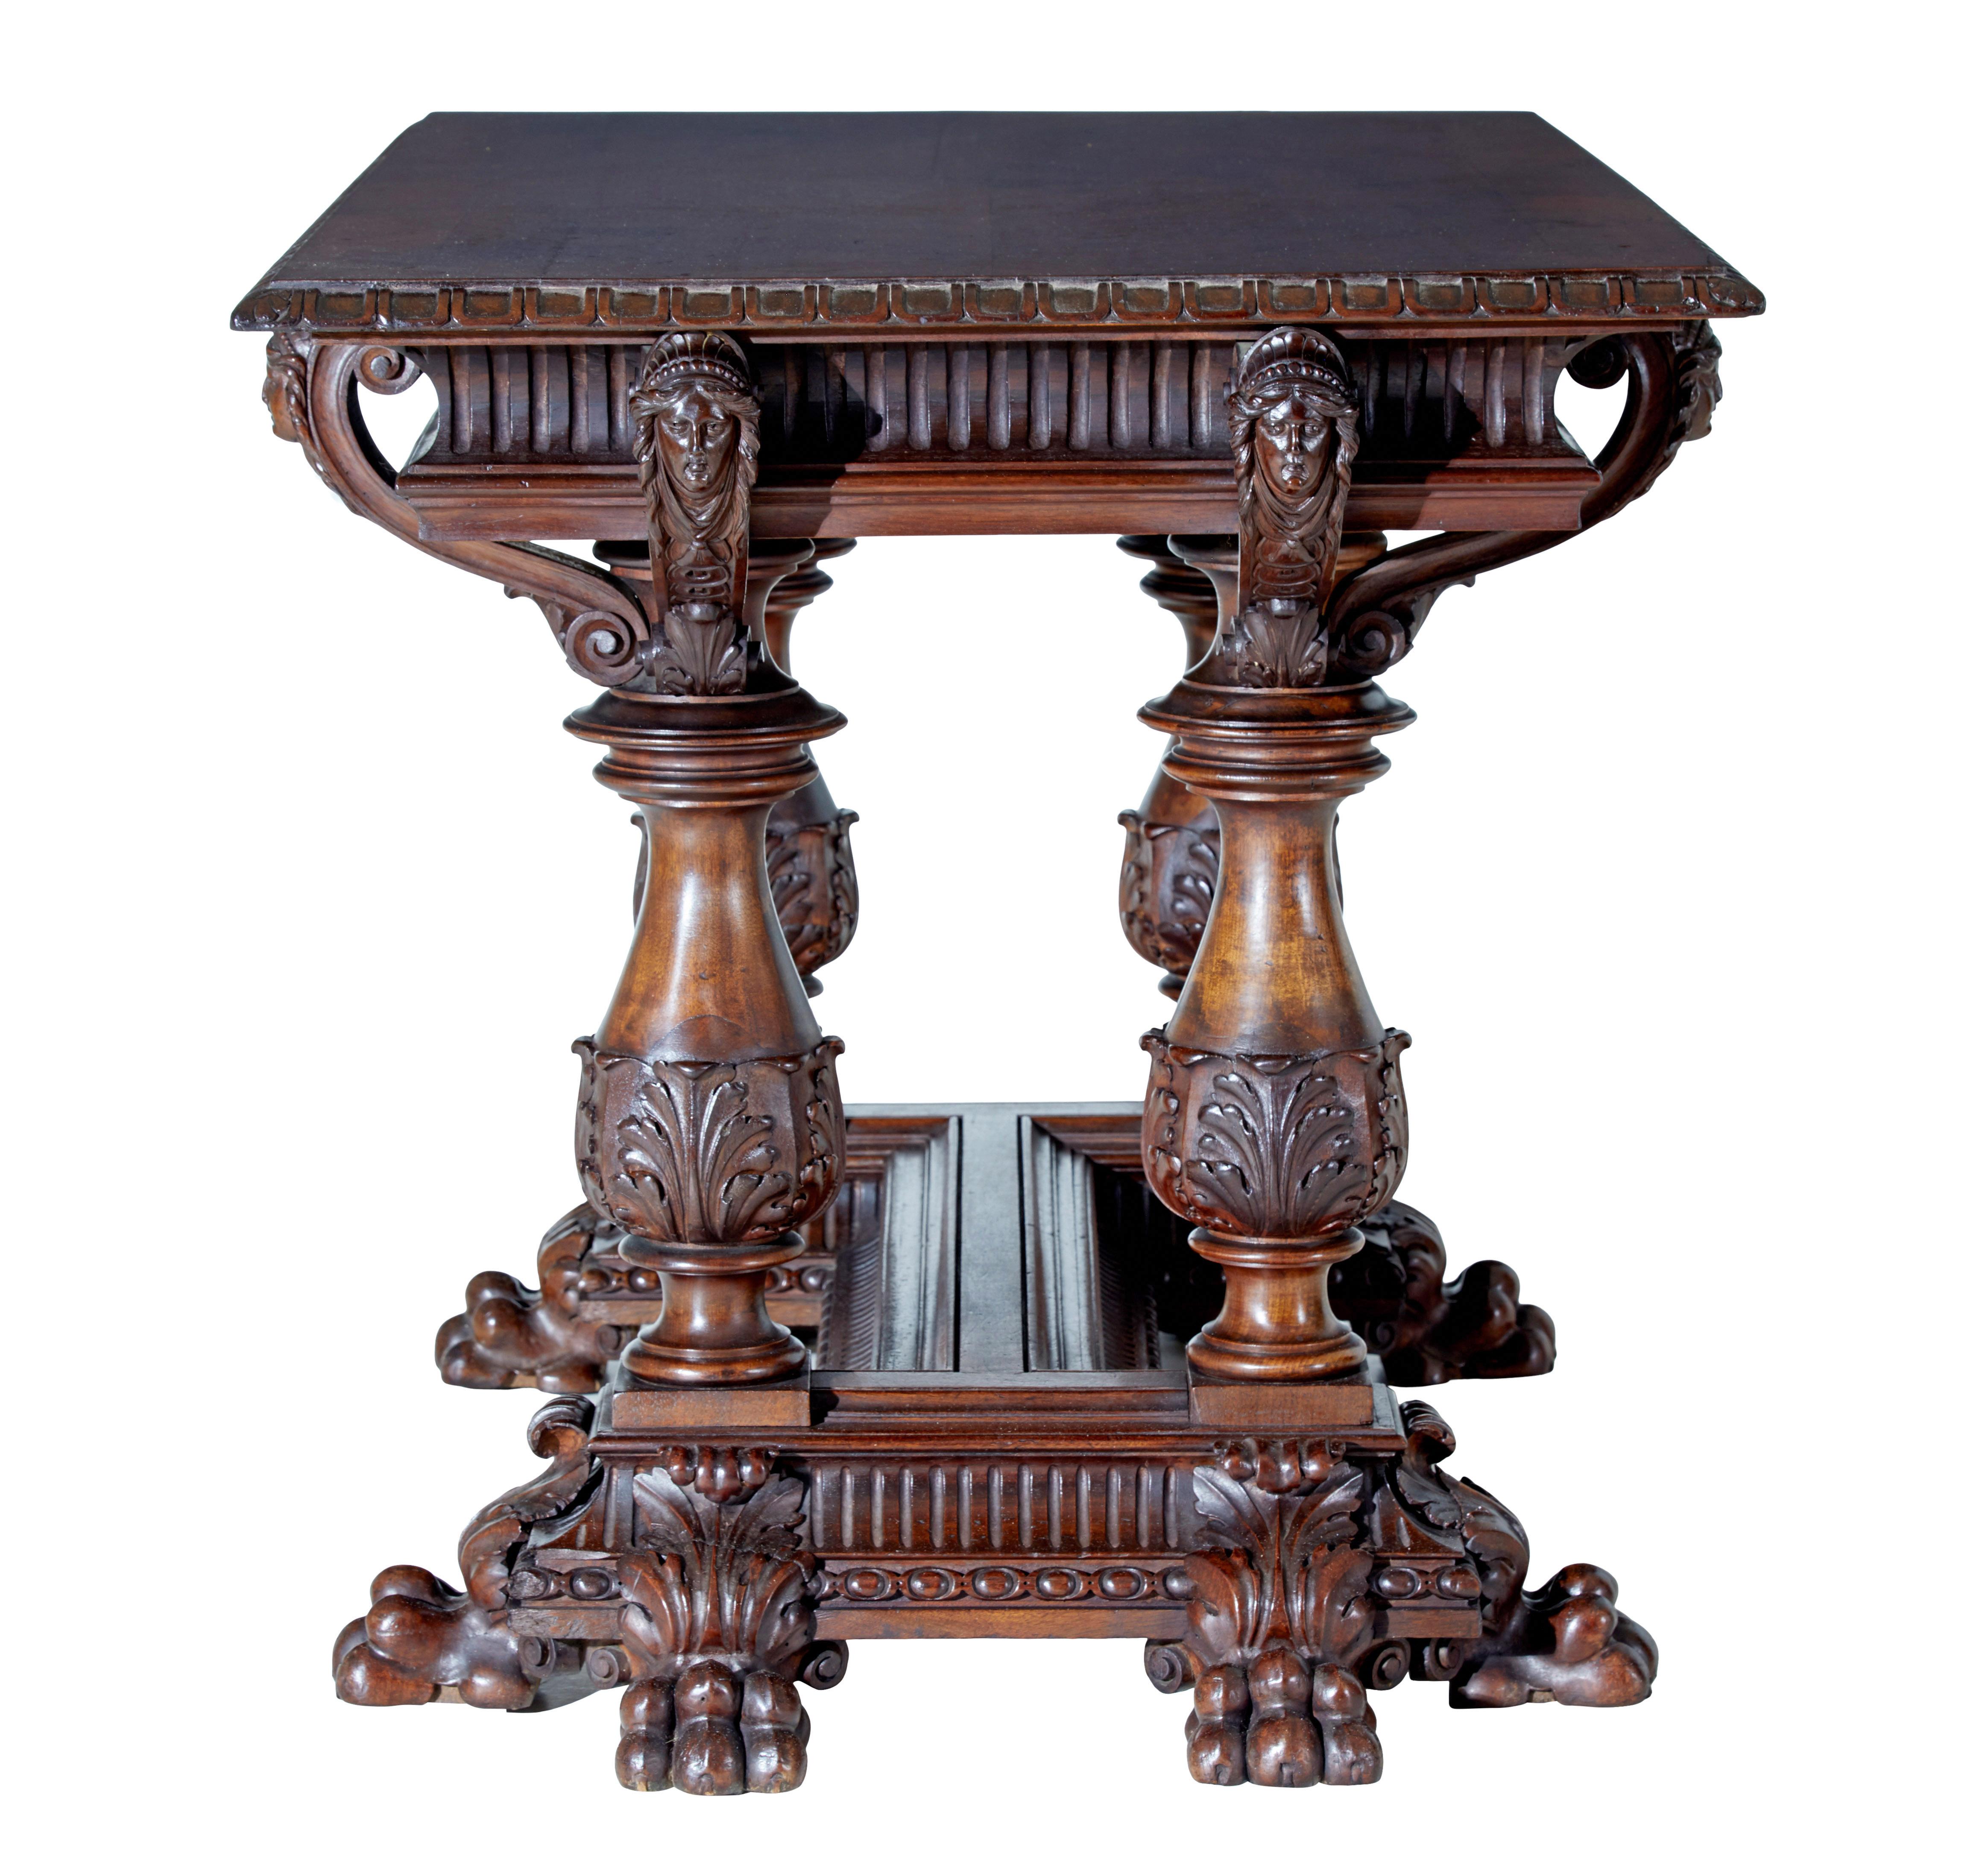 Gothic Revival 19th century Italian carved walnut center table